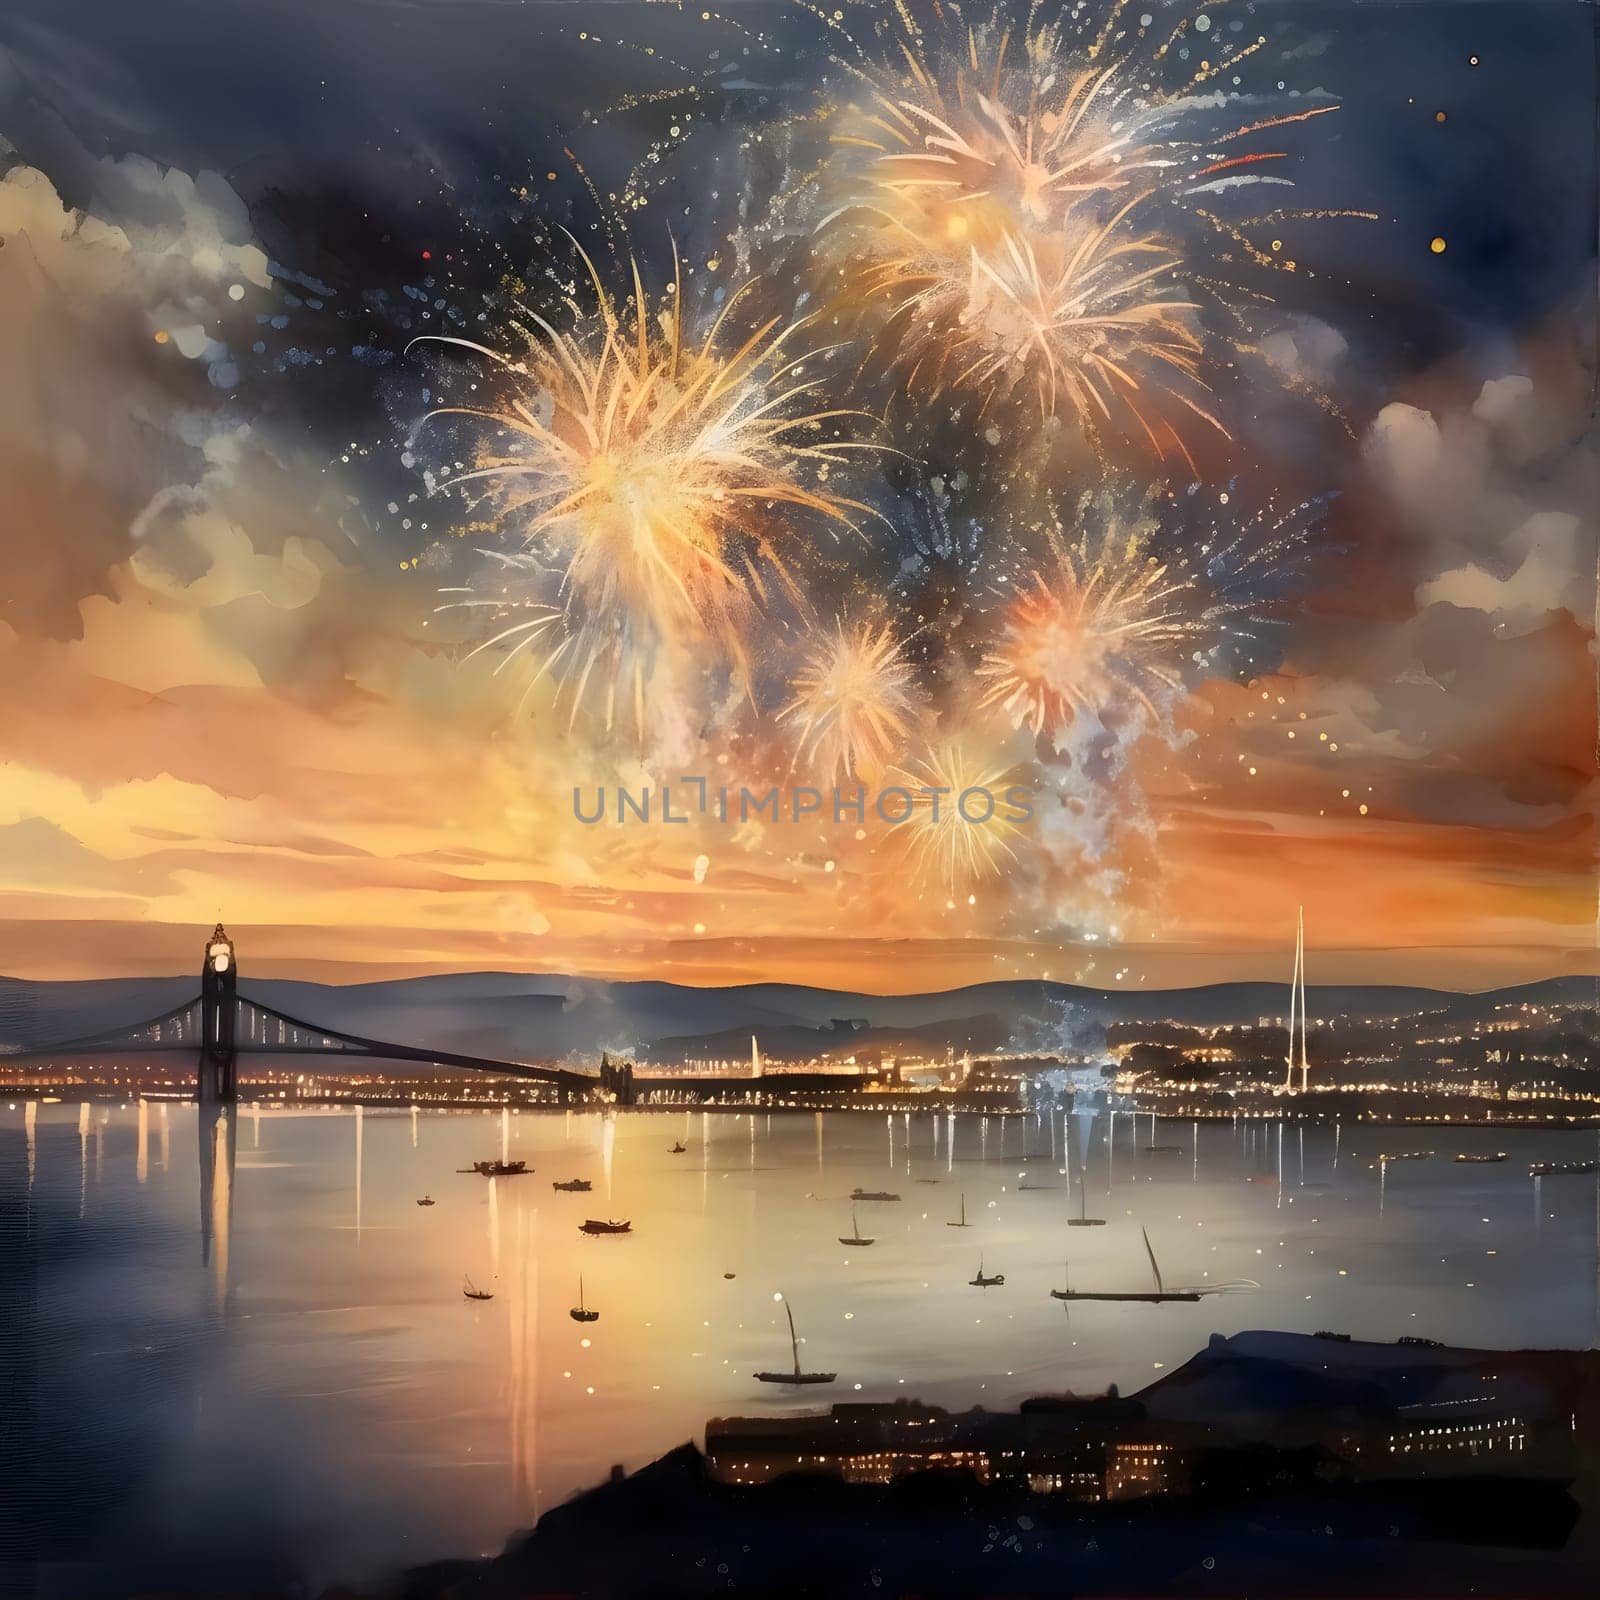 Illustration, fireworks show in the night sky bridge and floating boats. New Year's fun and festivities. by ThemesS